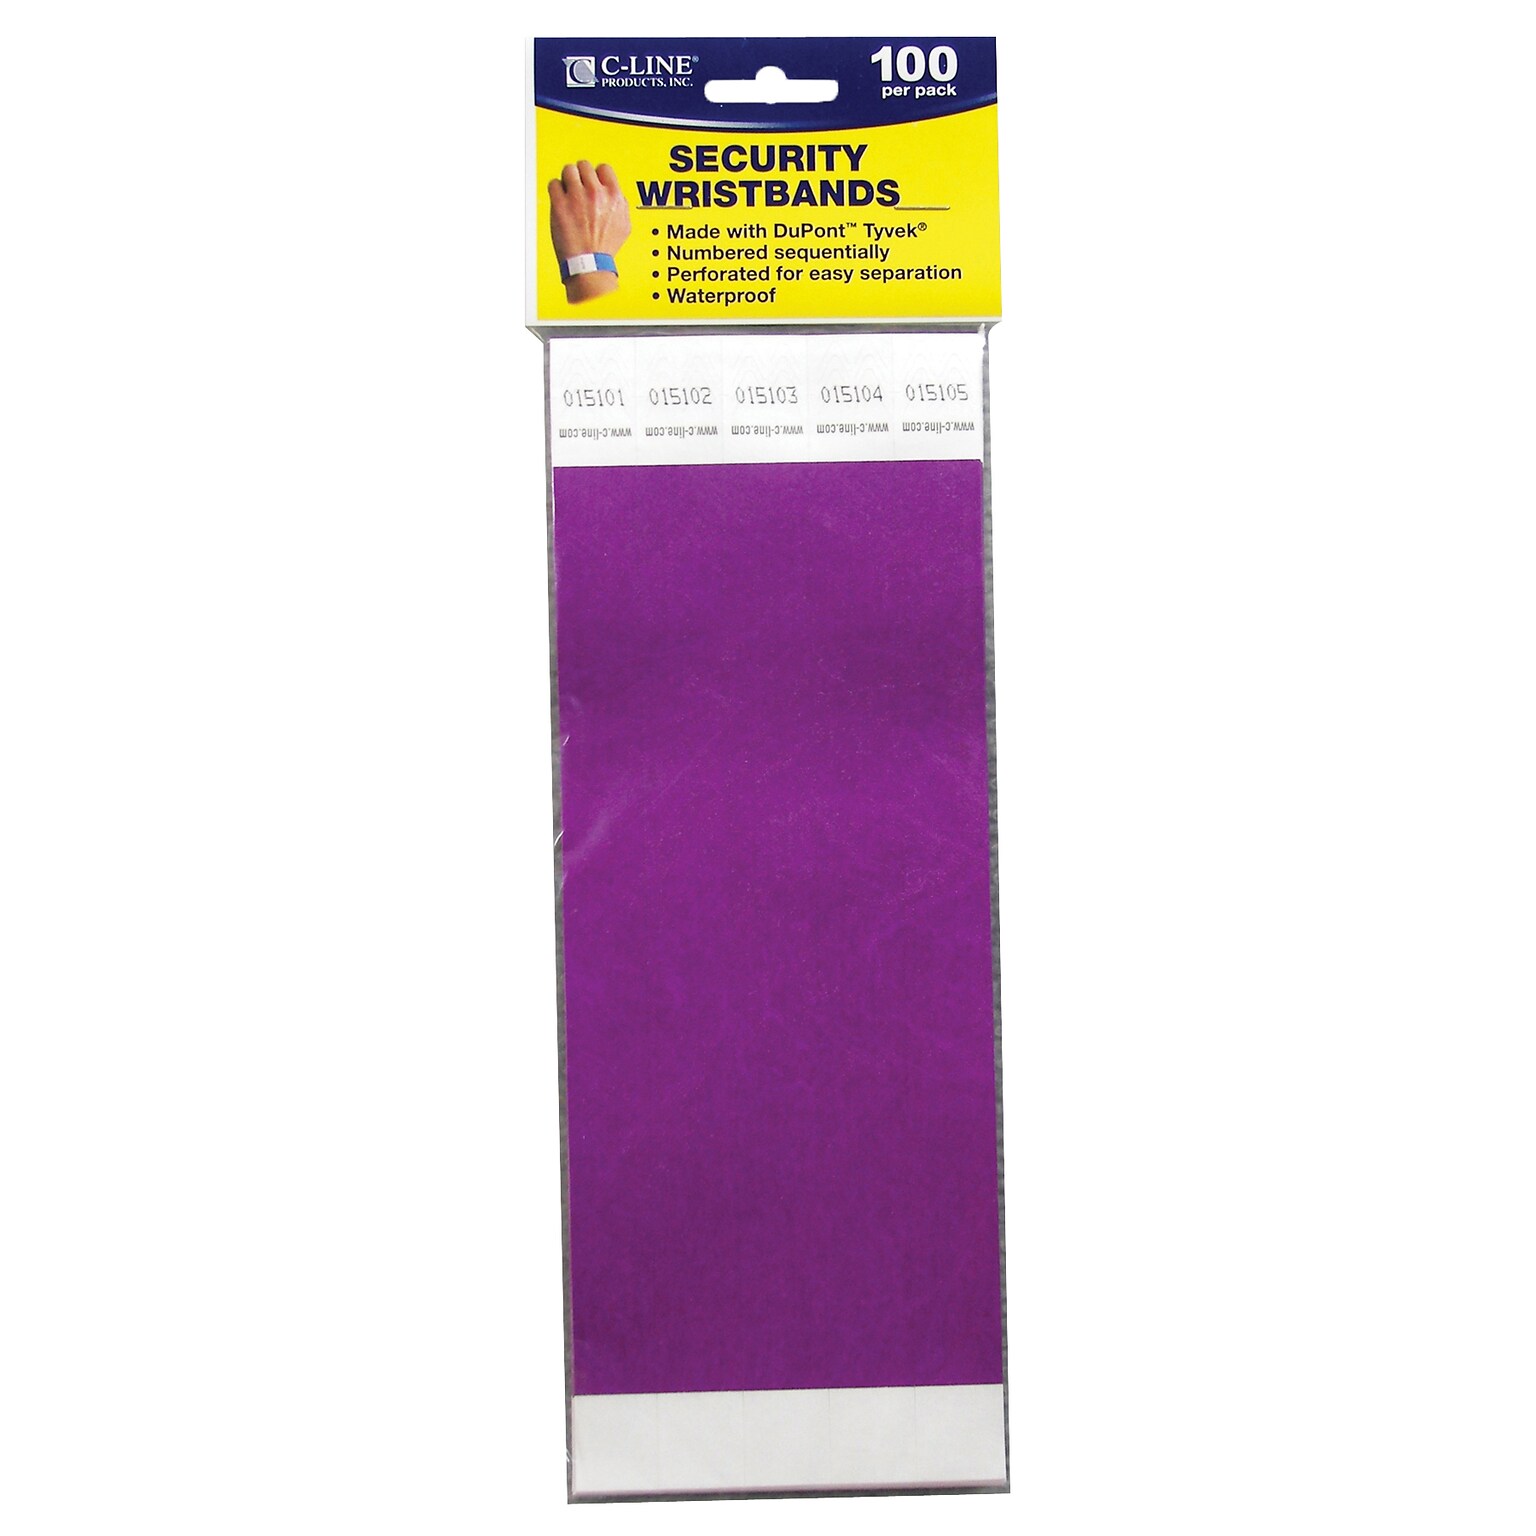 C-Line® CLI89109 Security Wristbands, Purple, Pack of 100